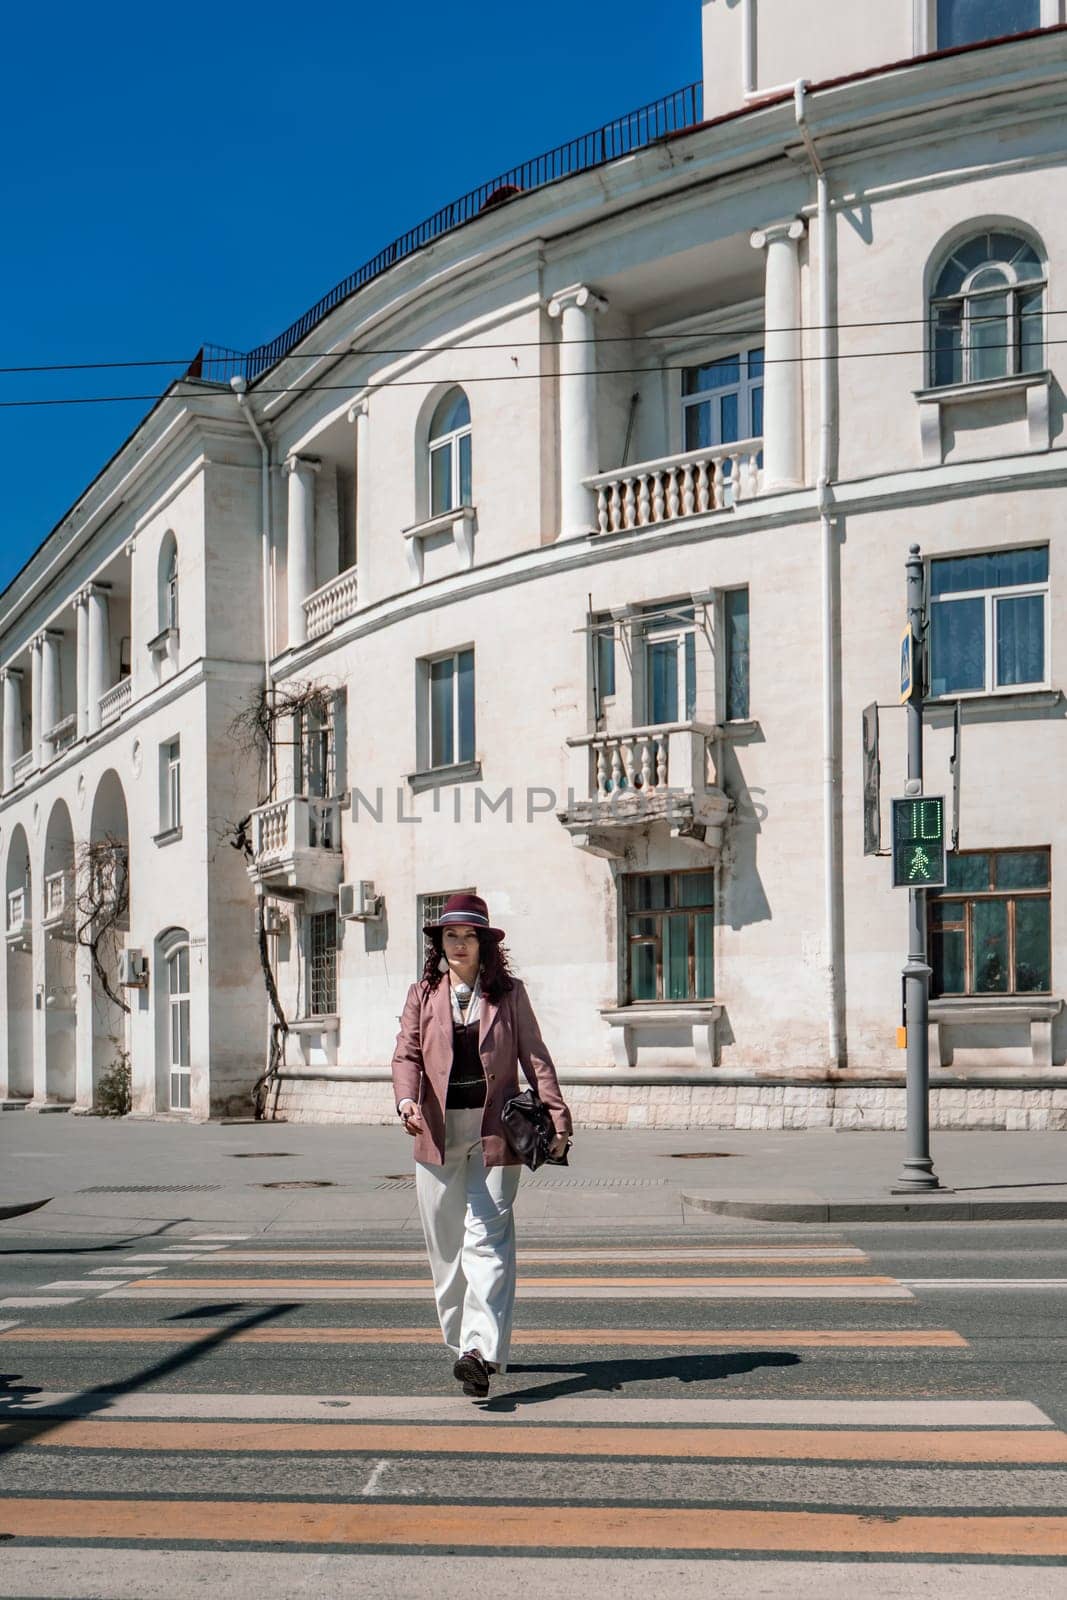 Woman city road crossing. Stylish woman in a hat crosses the road at a pedestrian crossing in the city. Dressed in white trousers and a jacket with a bag in her hands. by Matiunina